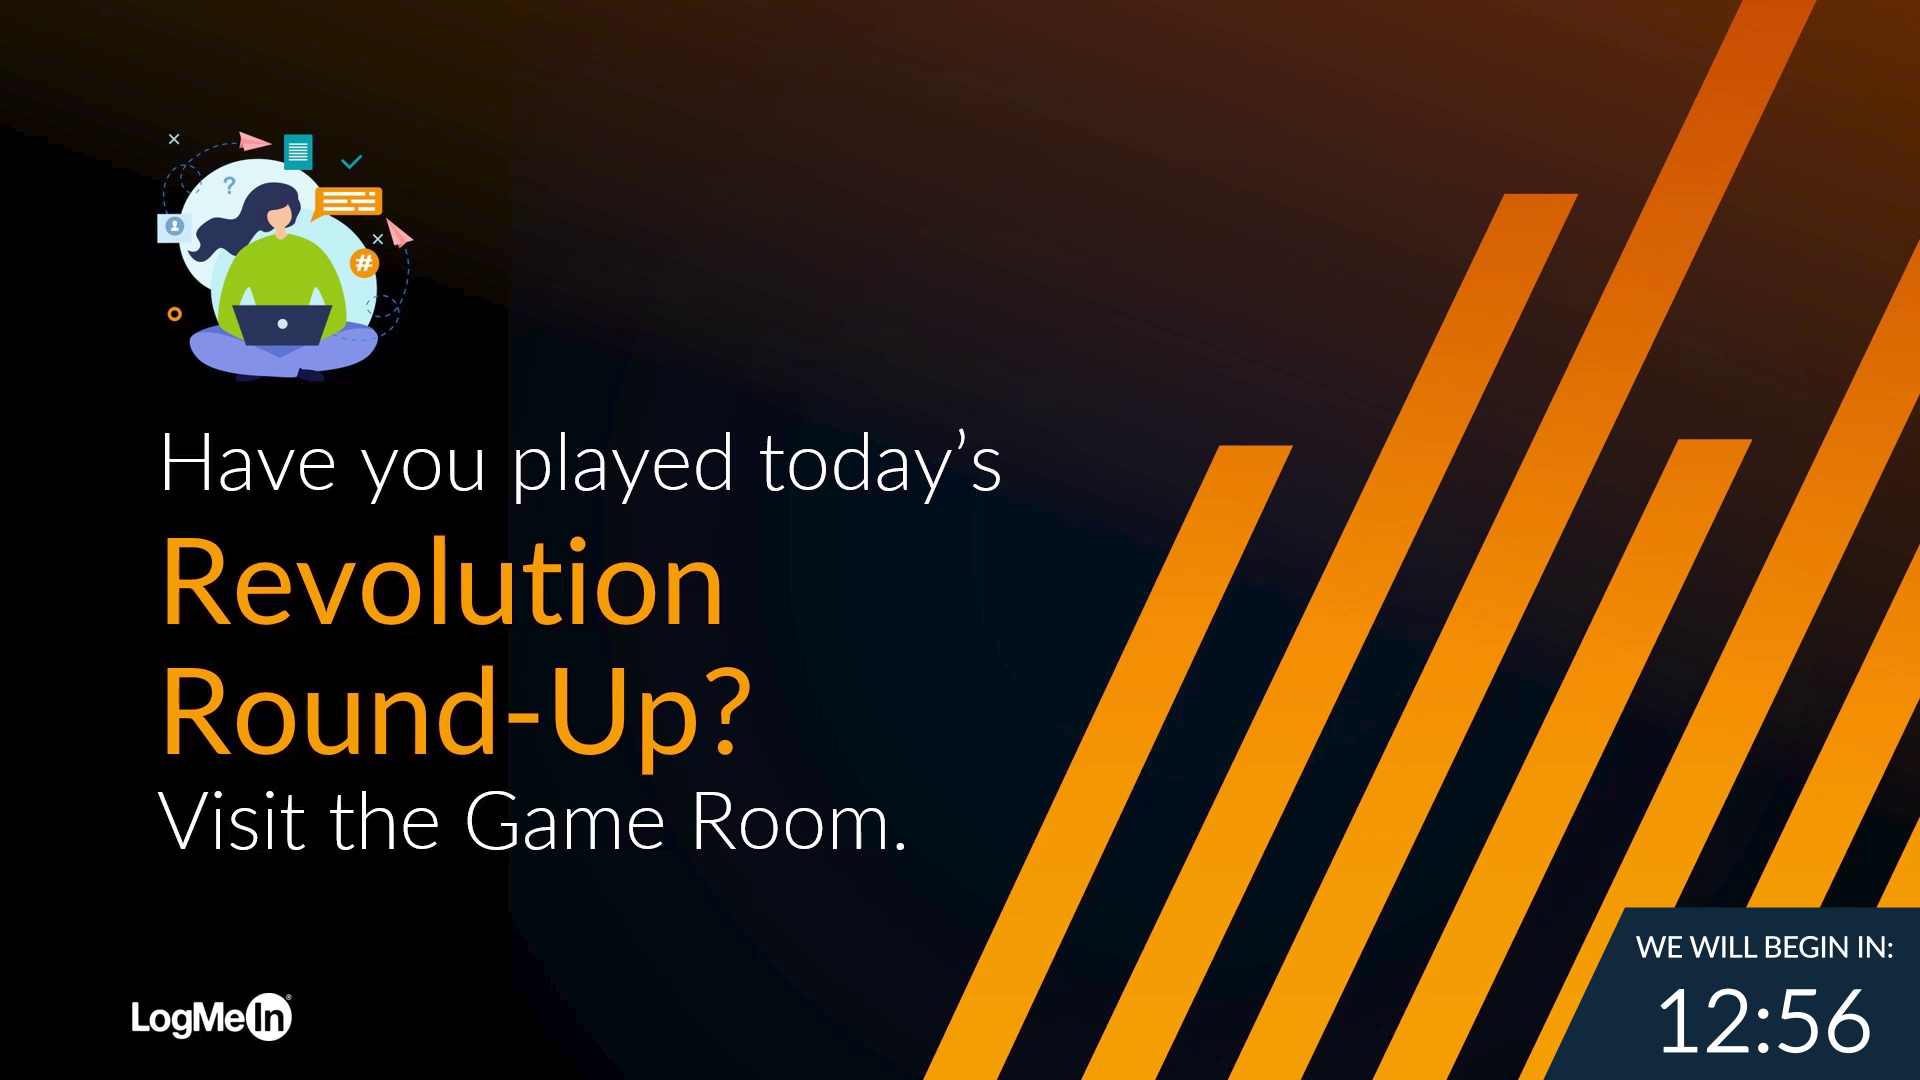 Welcome screen for event attendees that reads, "Have you played today's Revolution Round-Up? Visit the Game Room."